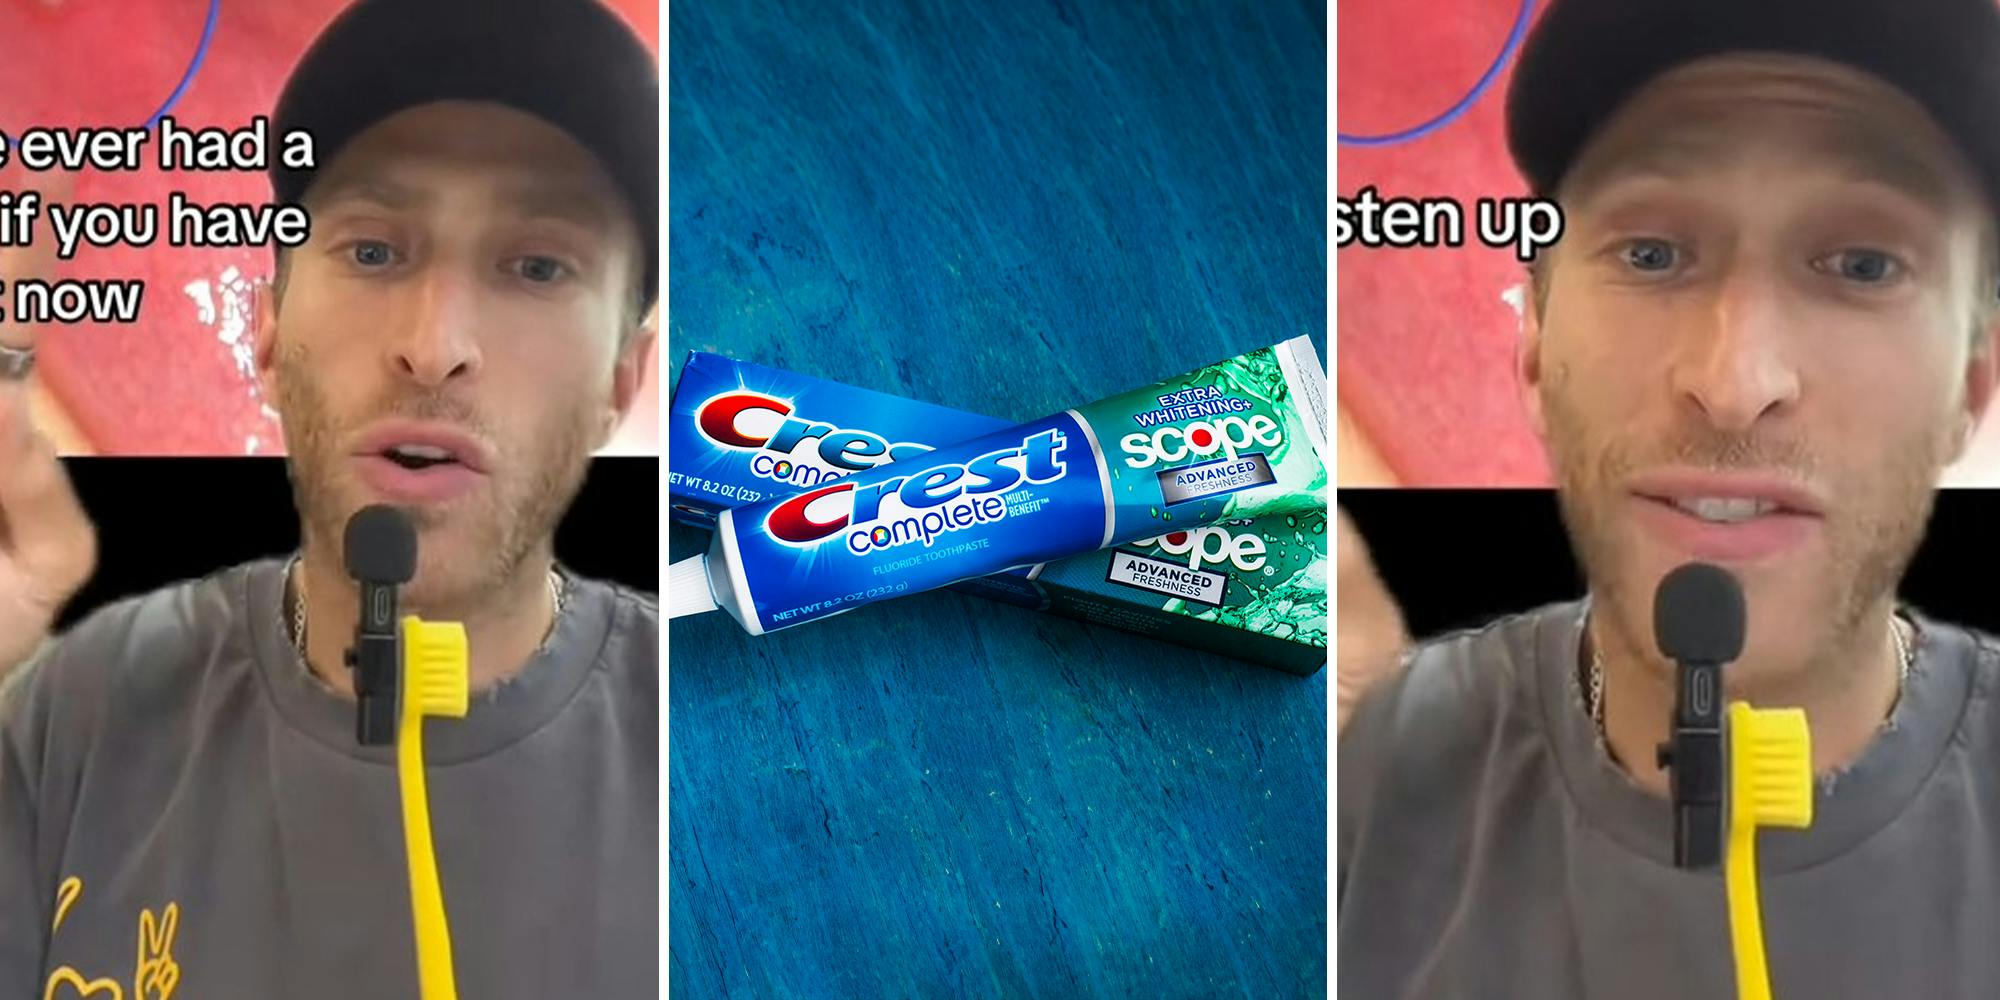 Expert says Crest toothpaste causes canker sores